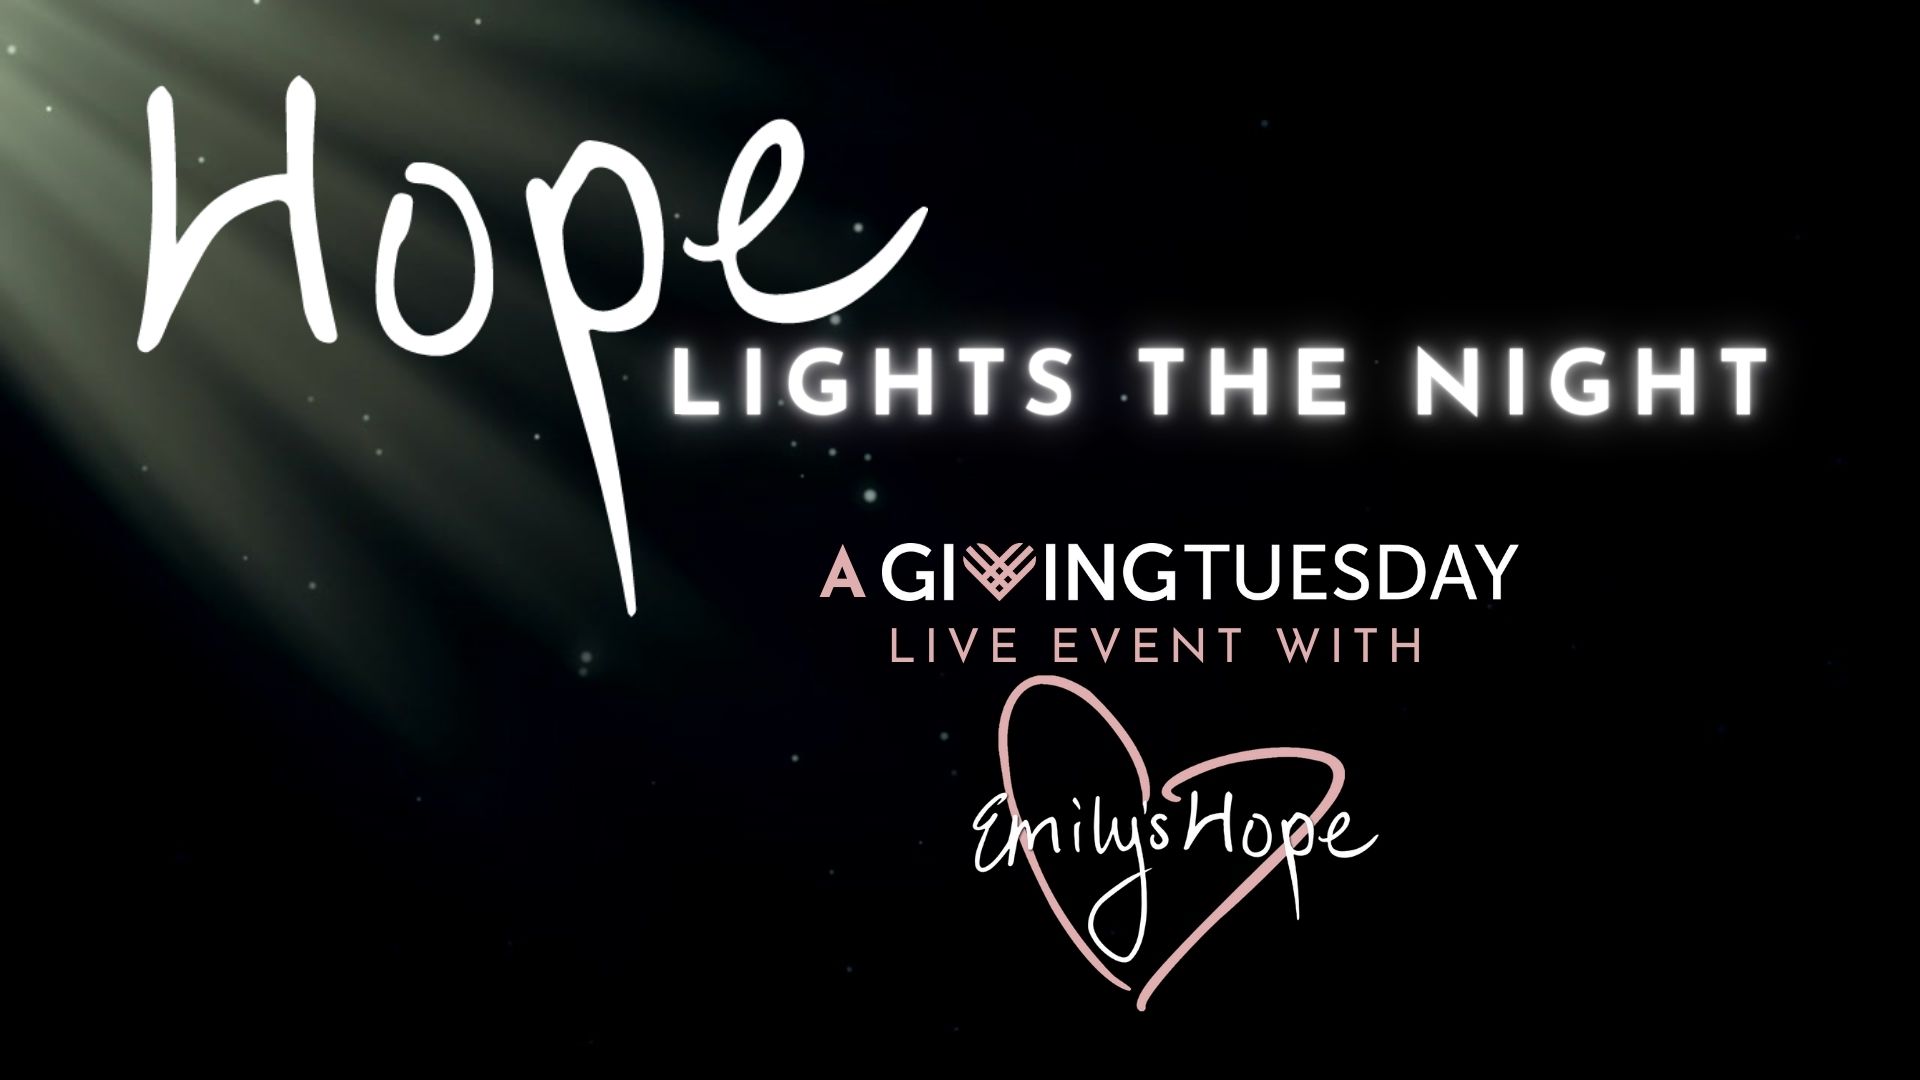 Emily’s Hope Surpasses $10,000 Goal on Giving Tuesday, Raises $10,265 in Generous Donations